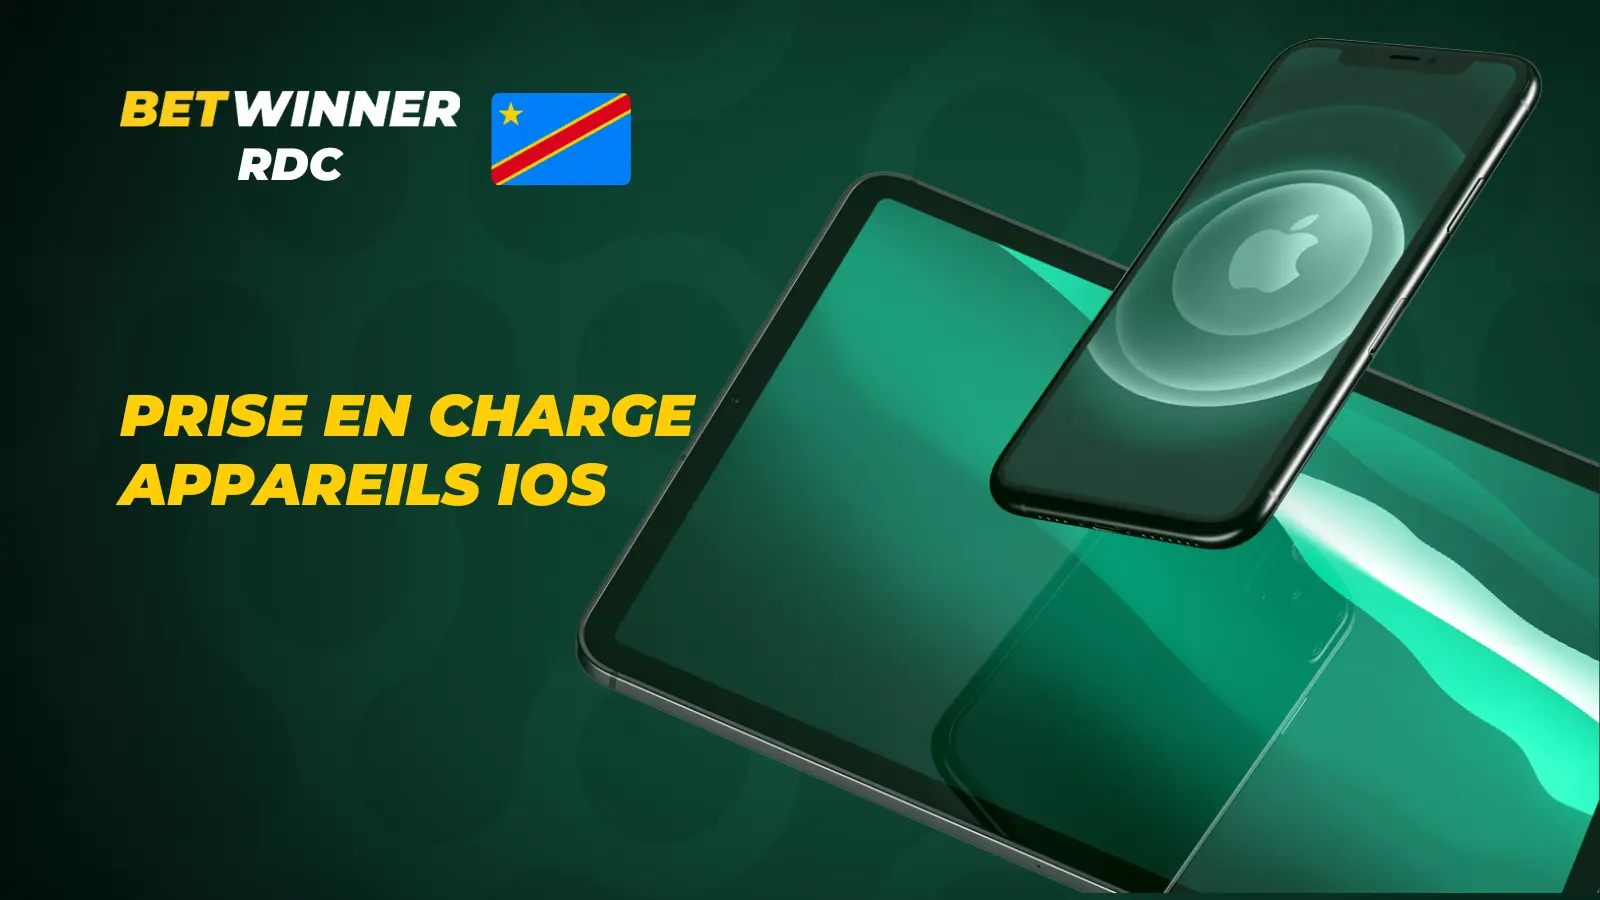 How We Improved Our télécharger Betwinner APK In One Week